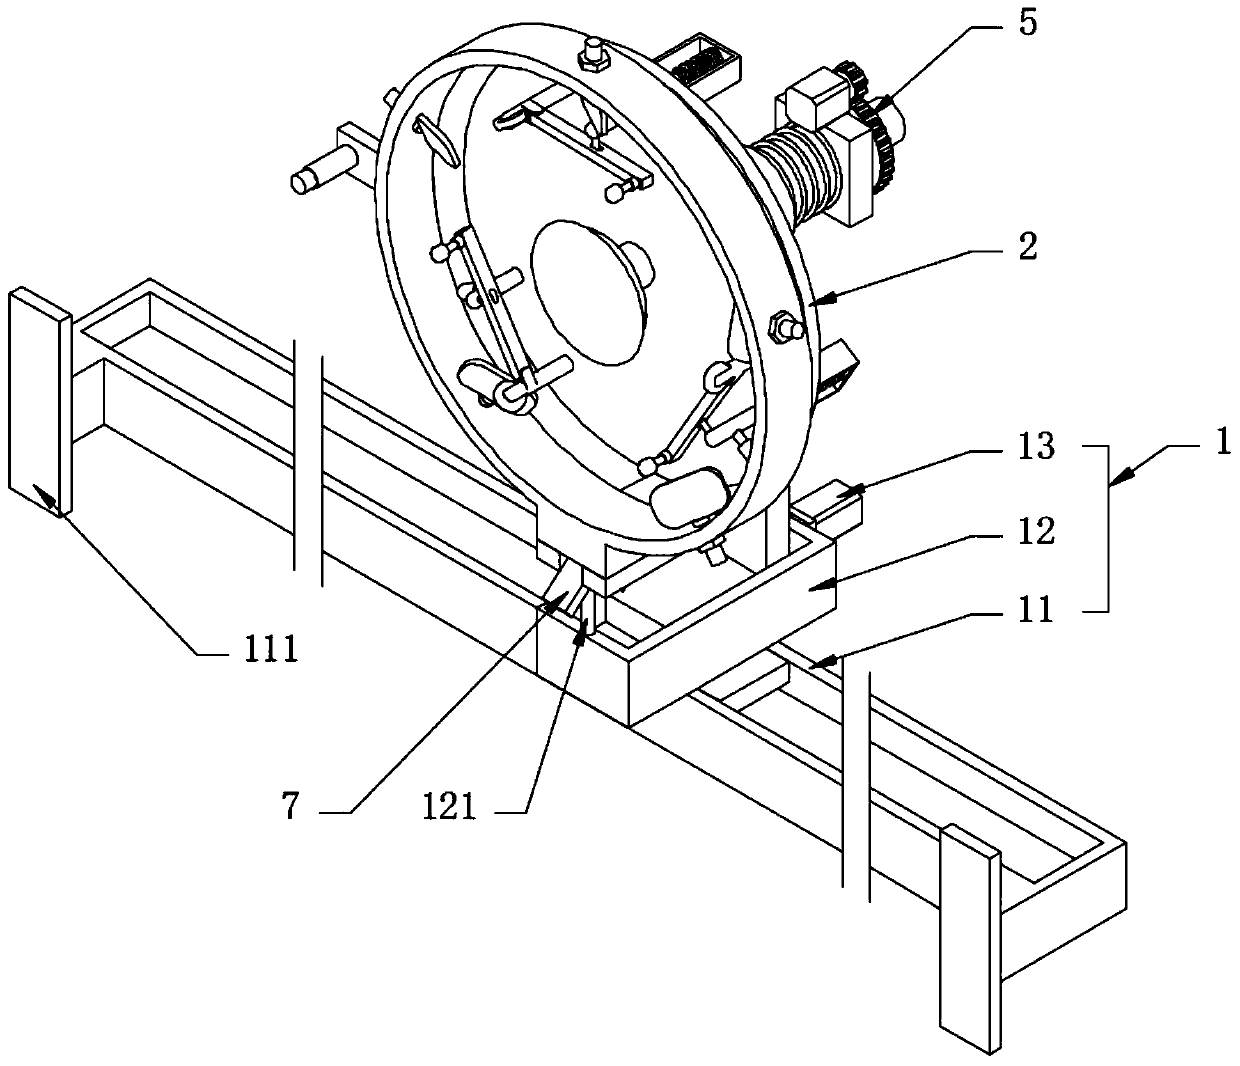 Self-excited vibrator construction device